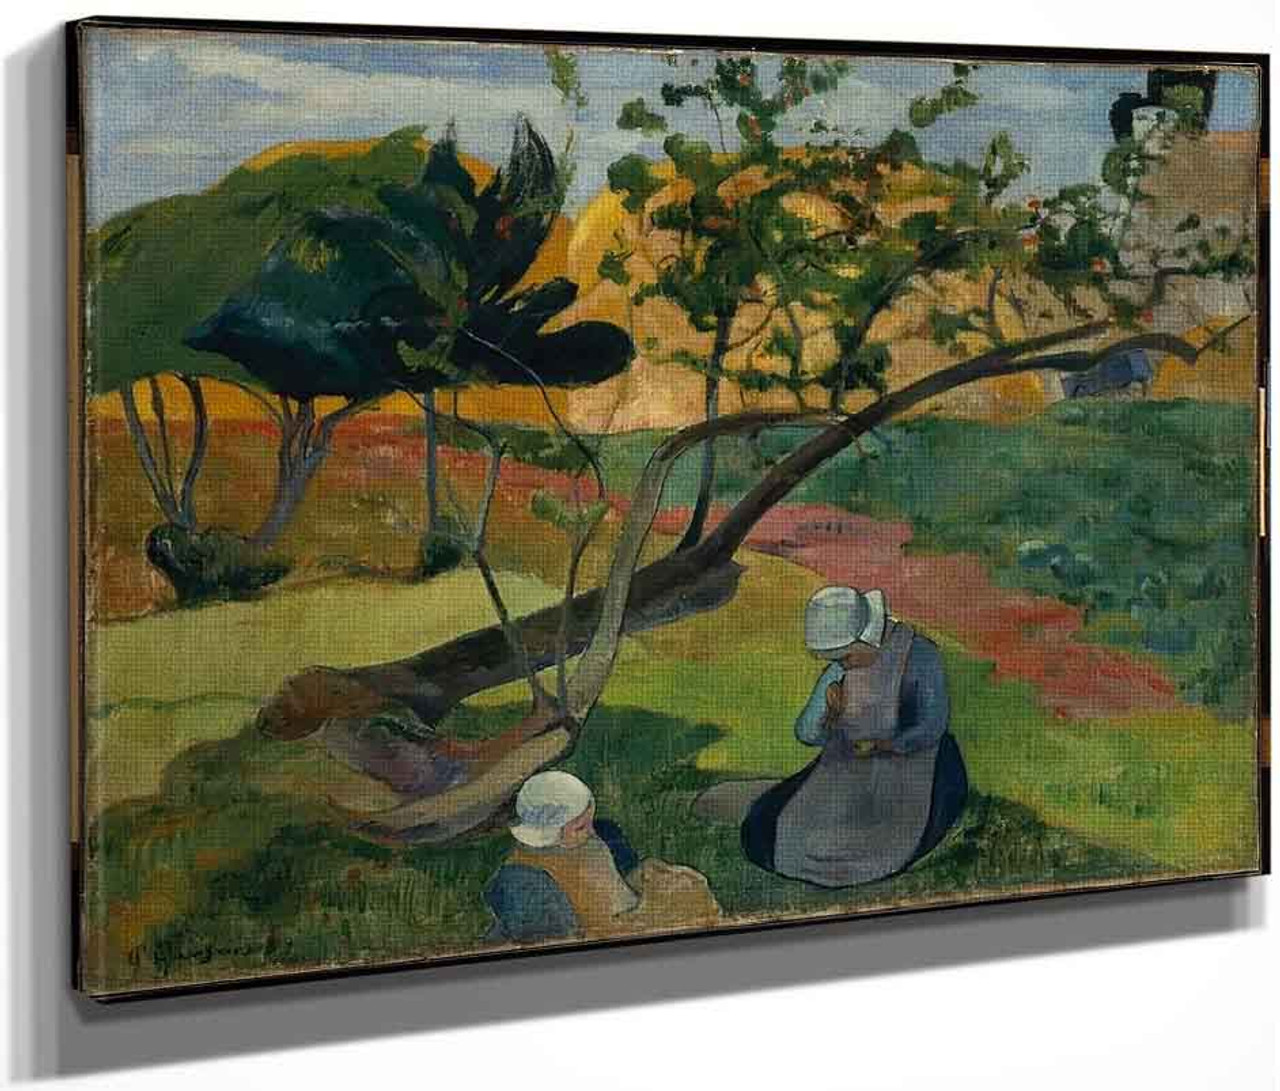 Two Breton By Paul Gauguin Print or Painting Reproduction from Cutler Miles.